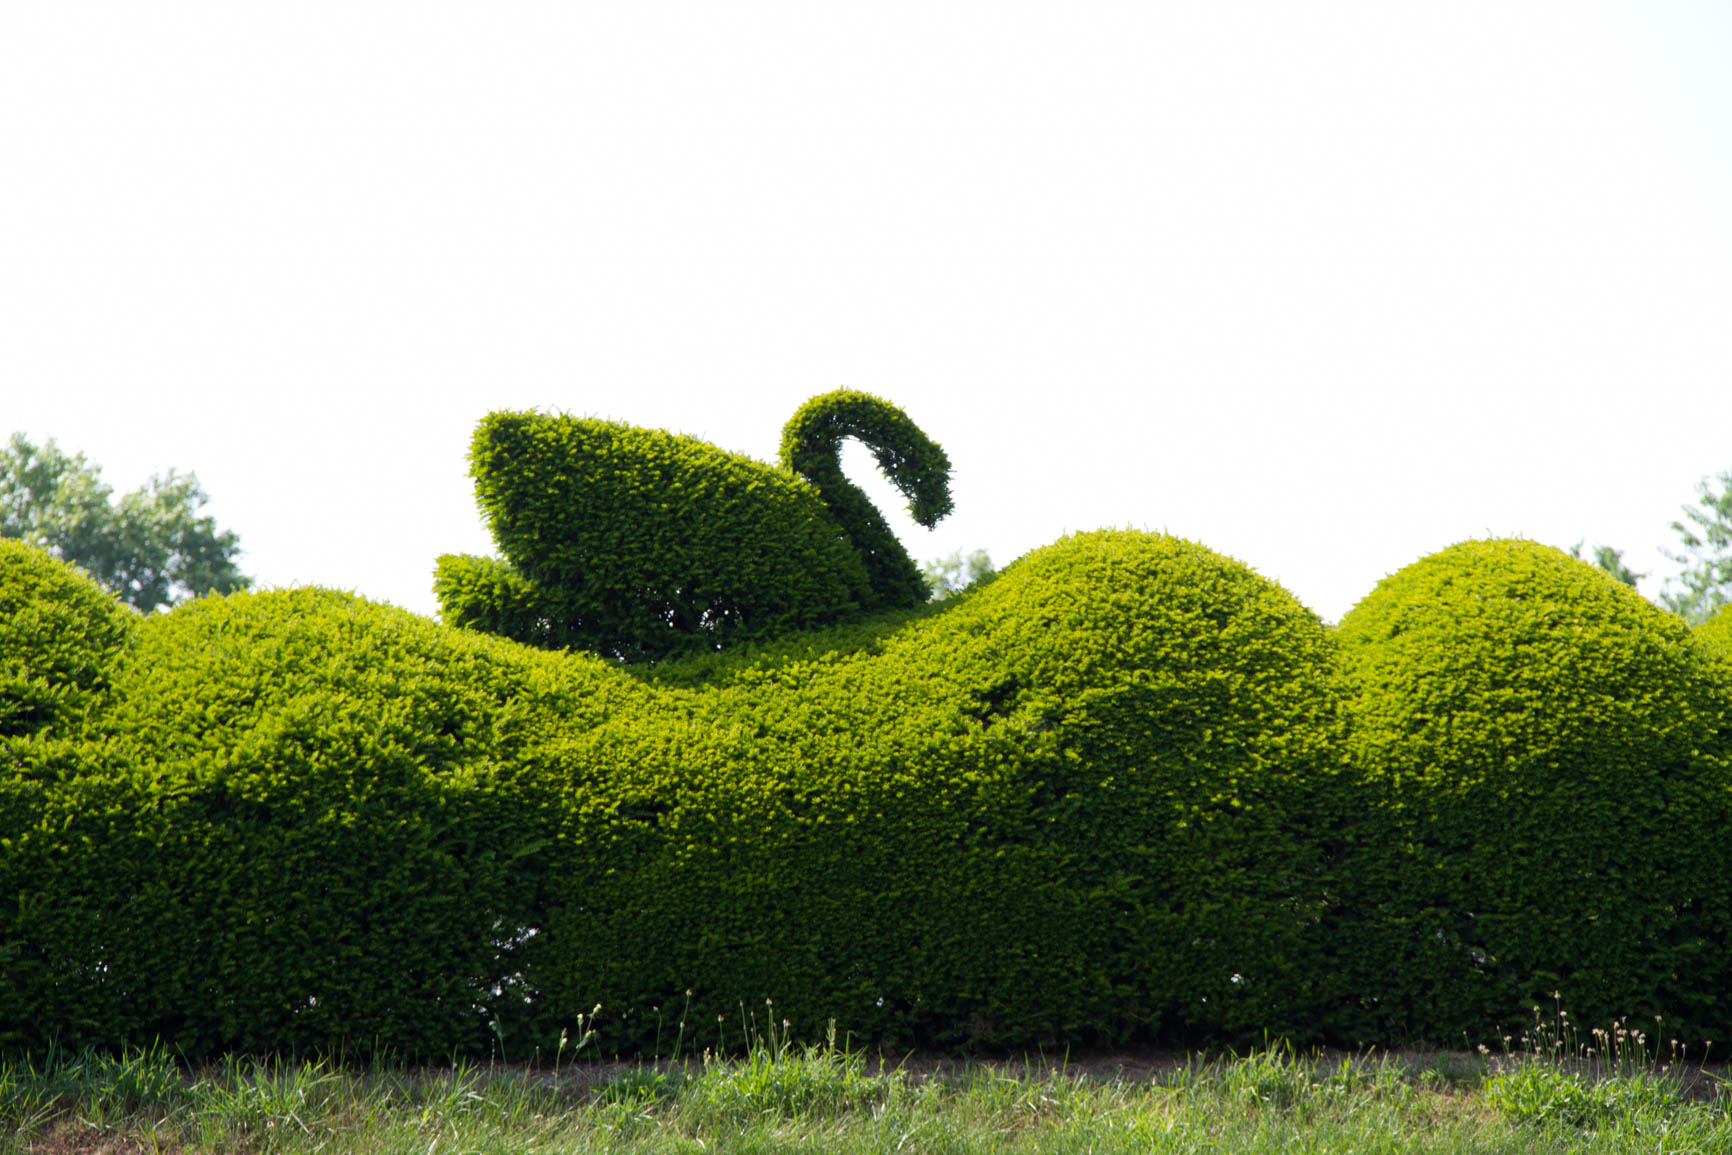 Consider the time that went into shaping this fine piece of topiary, and the skill that was needed to do it. Quite impressive!